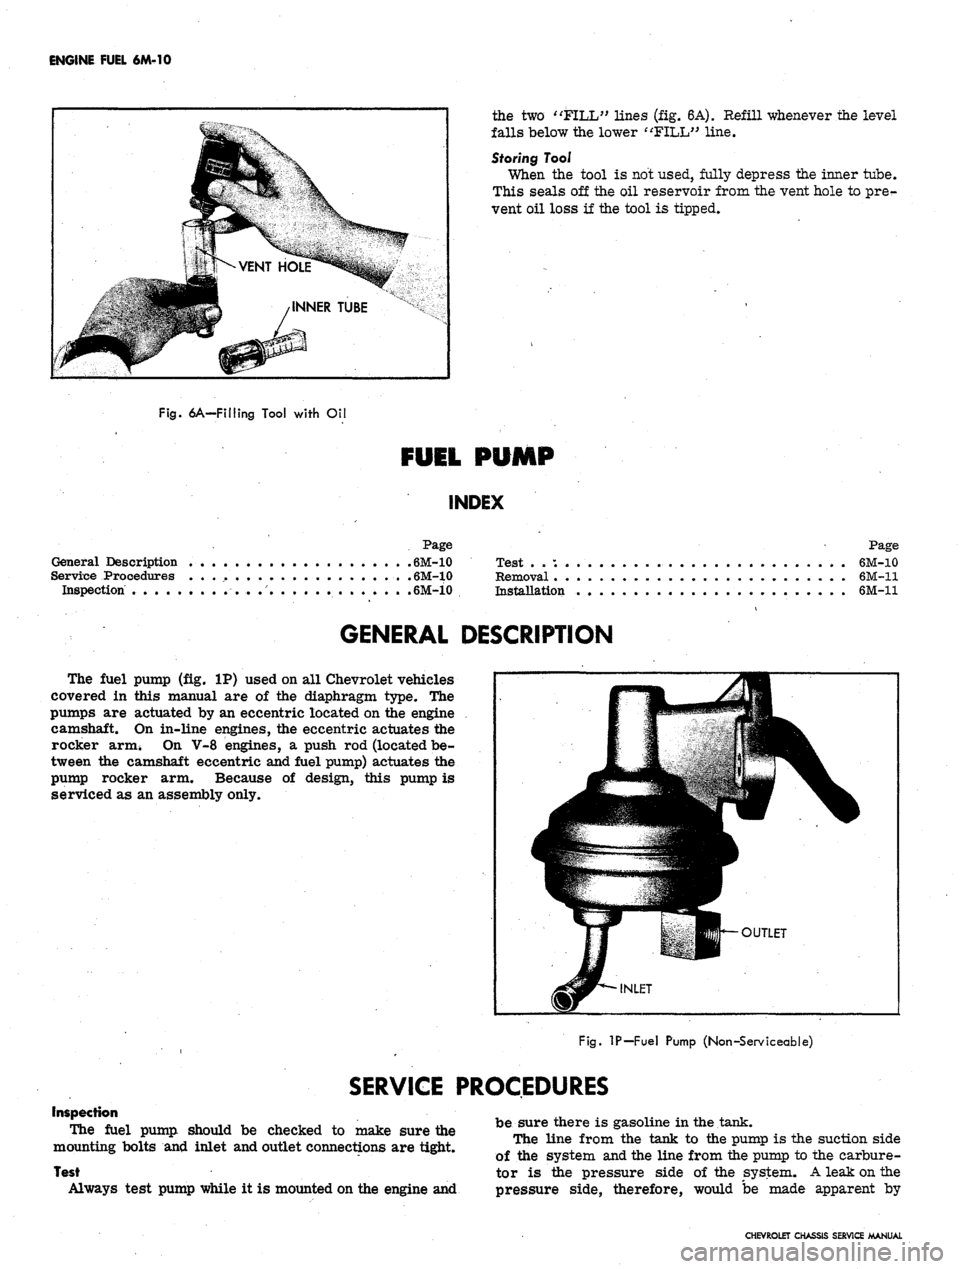 CHEVROLET CAMARO 1967 1.G Chassis Workshop Manual 
ENGINE FUEL
 6M-10

the
 two
 "FILL71 lines
 (fig.
 6A). Refill whenever
 the
 level

falls below the lower
 <FILL"
 line.

Storing Tool

When
 the
 tool
 is
 not used, fully depress
 the
 inner tub